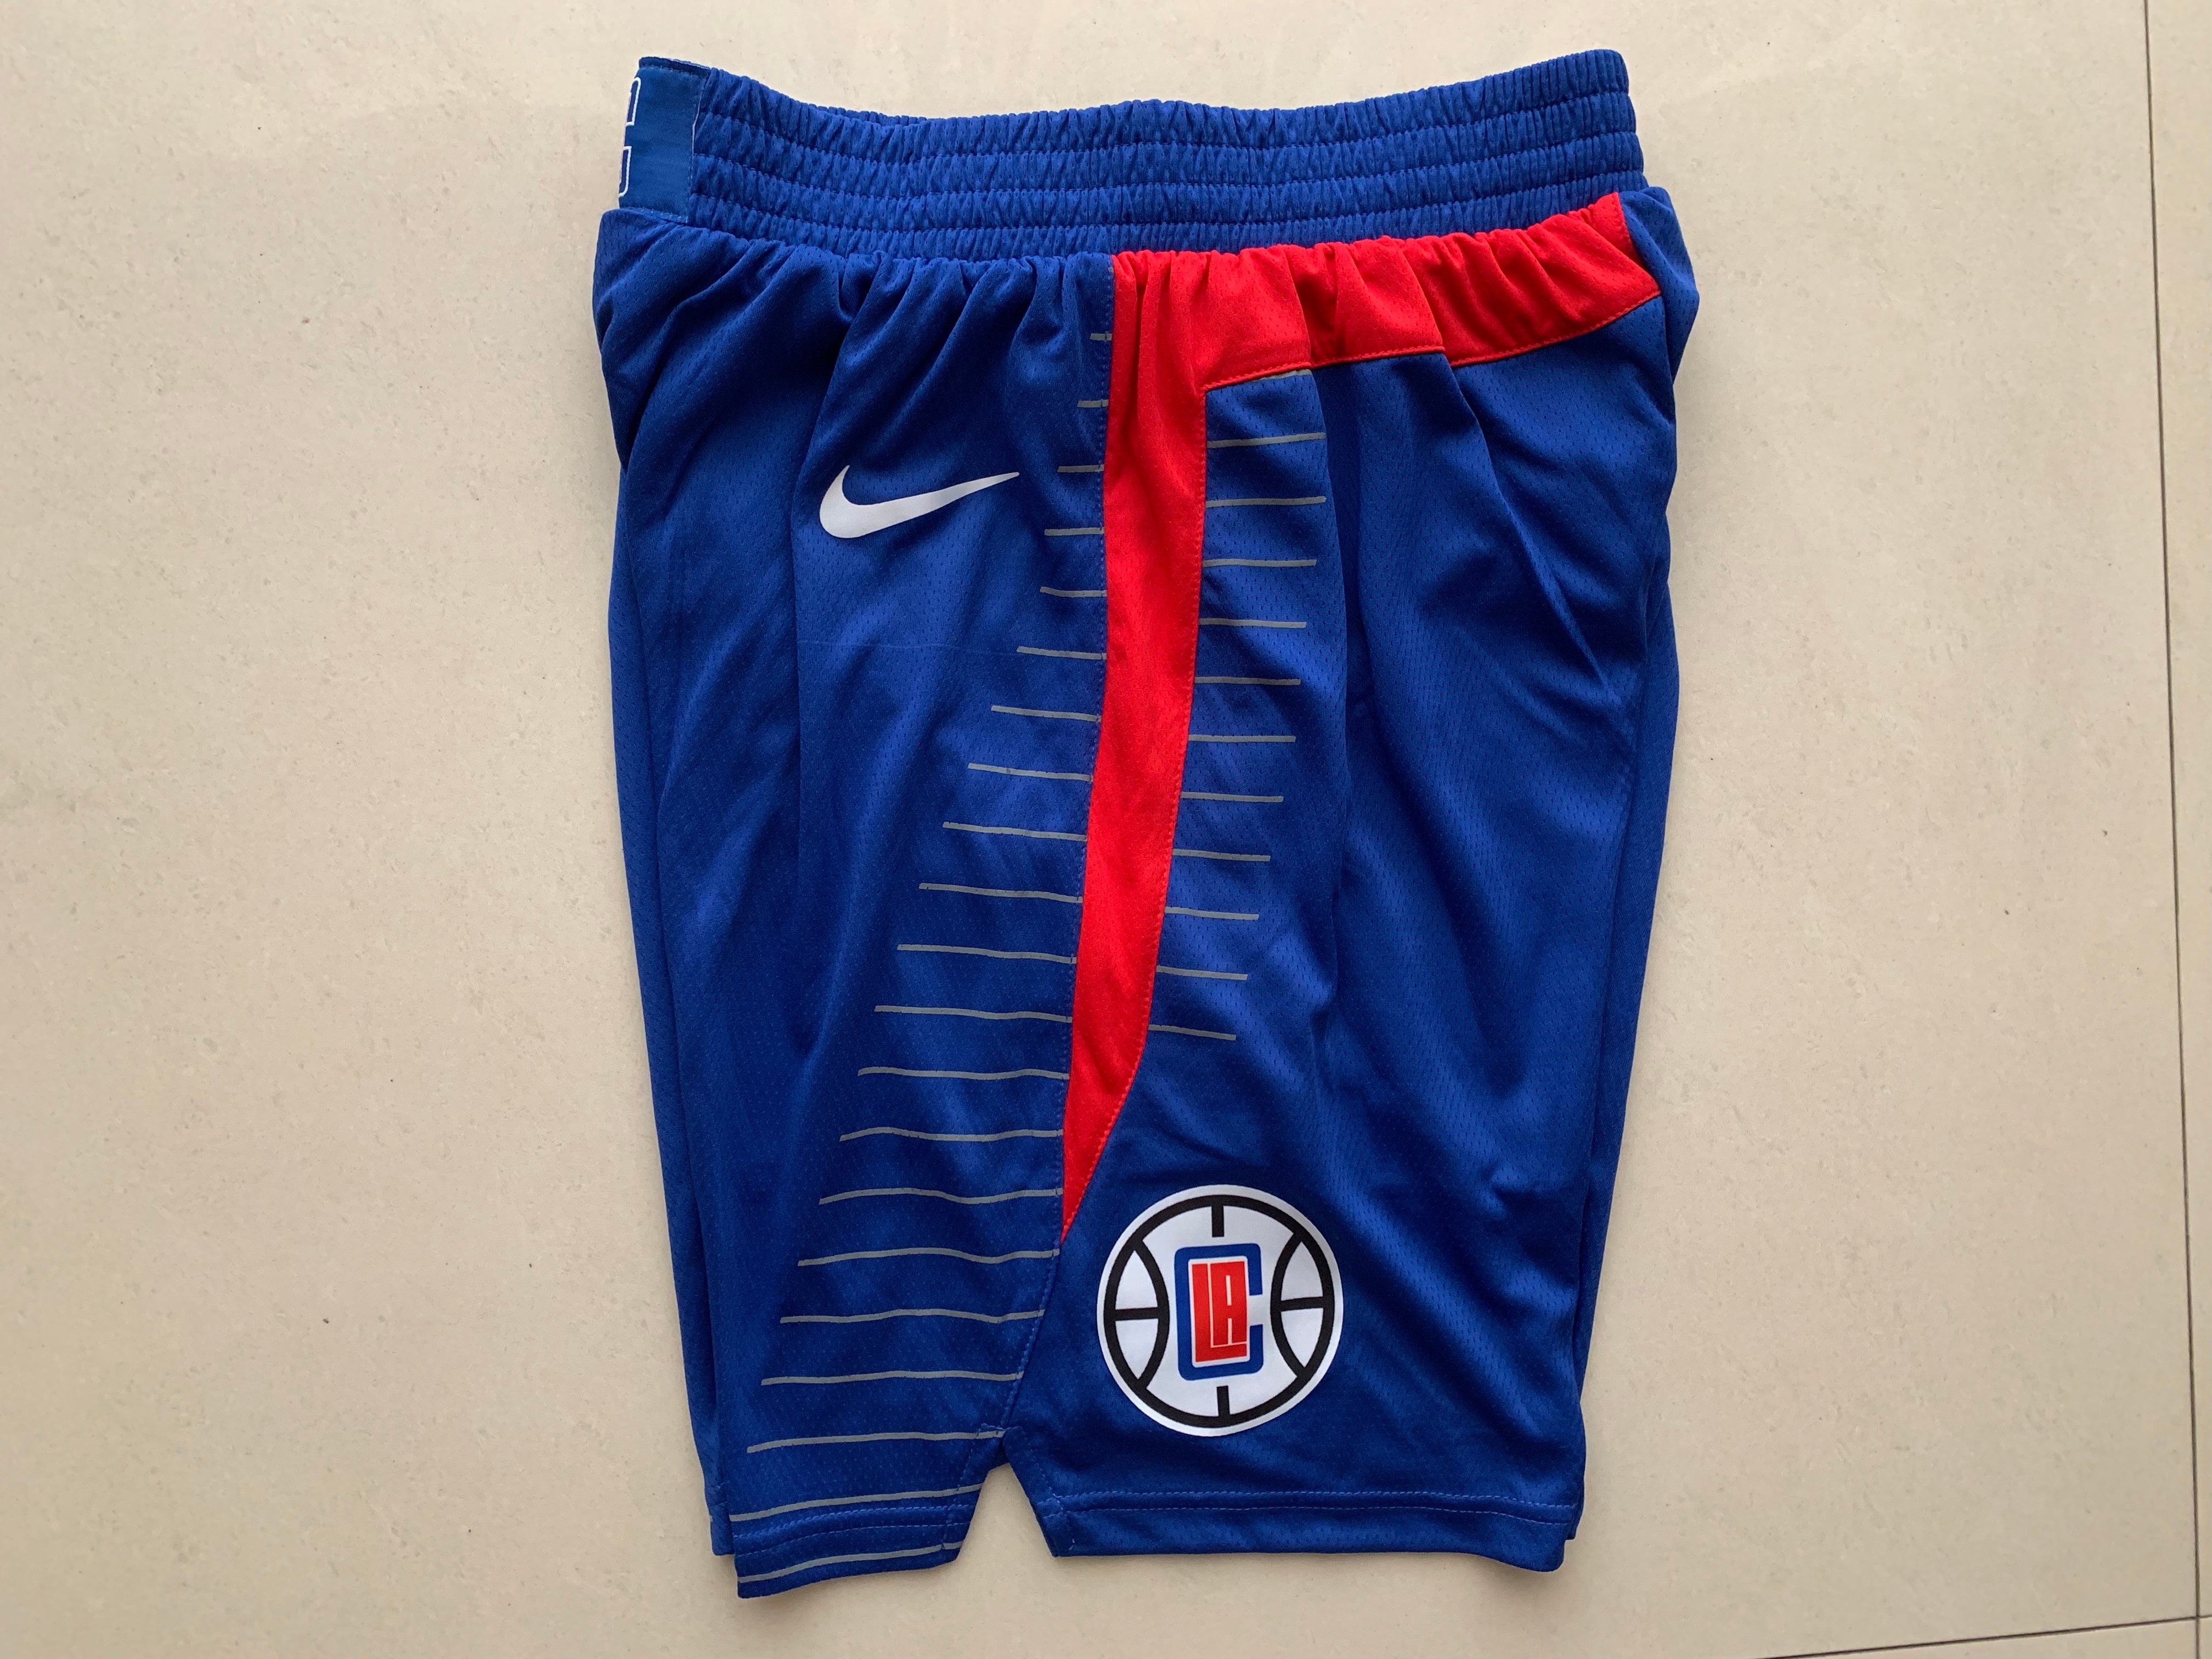 Clippers blue shorts